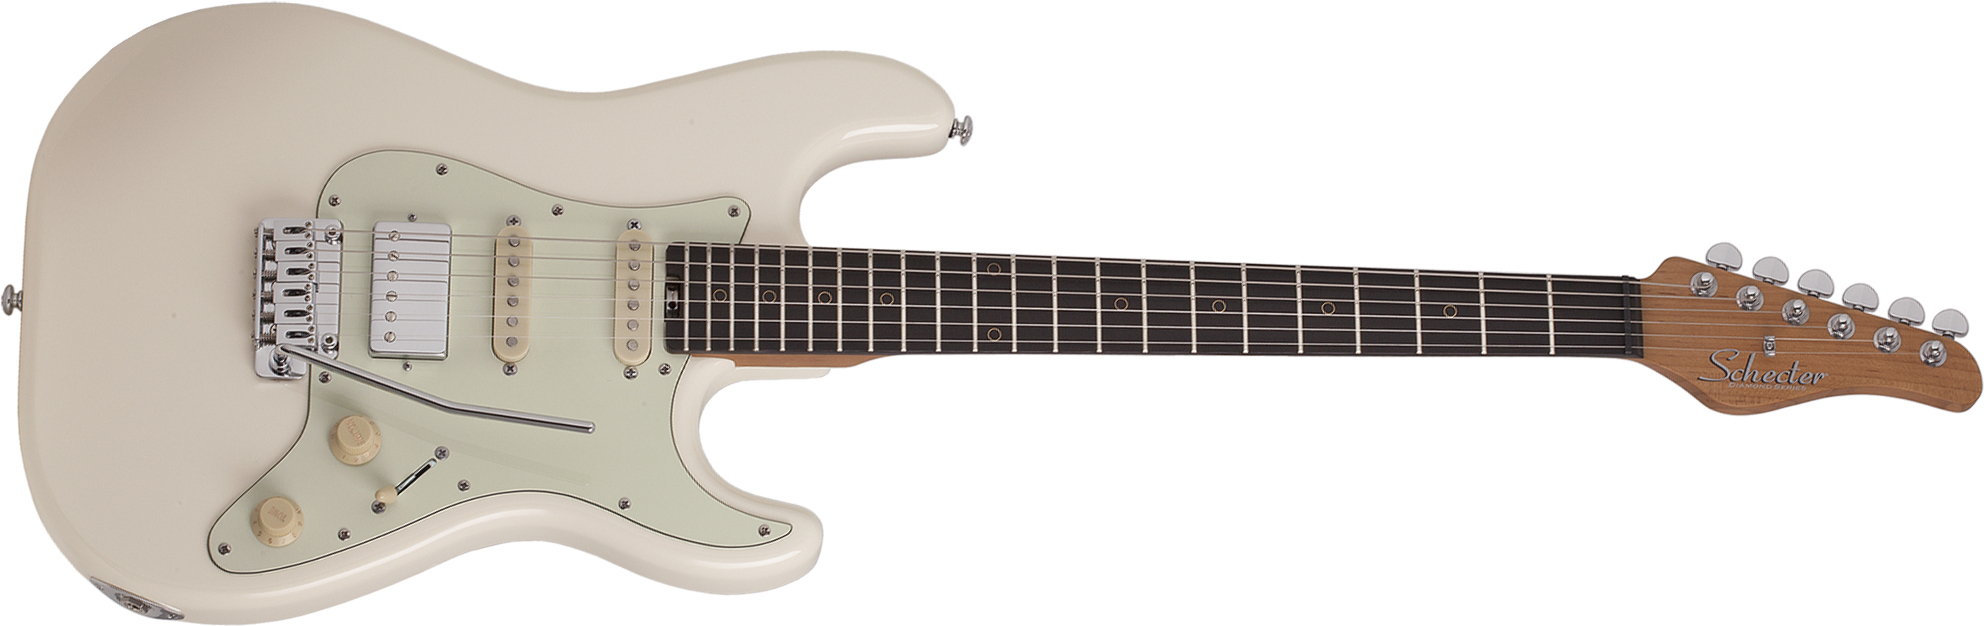 Schecter Nick Johnston Traditional Hss Trem Eb - Atomic Snow - Str shape electric guitar - Main picture